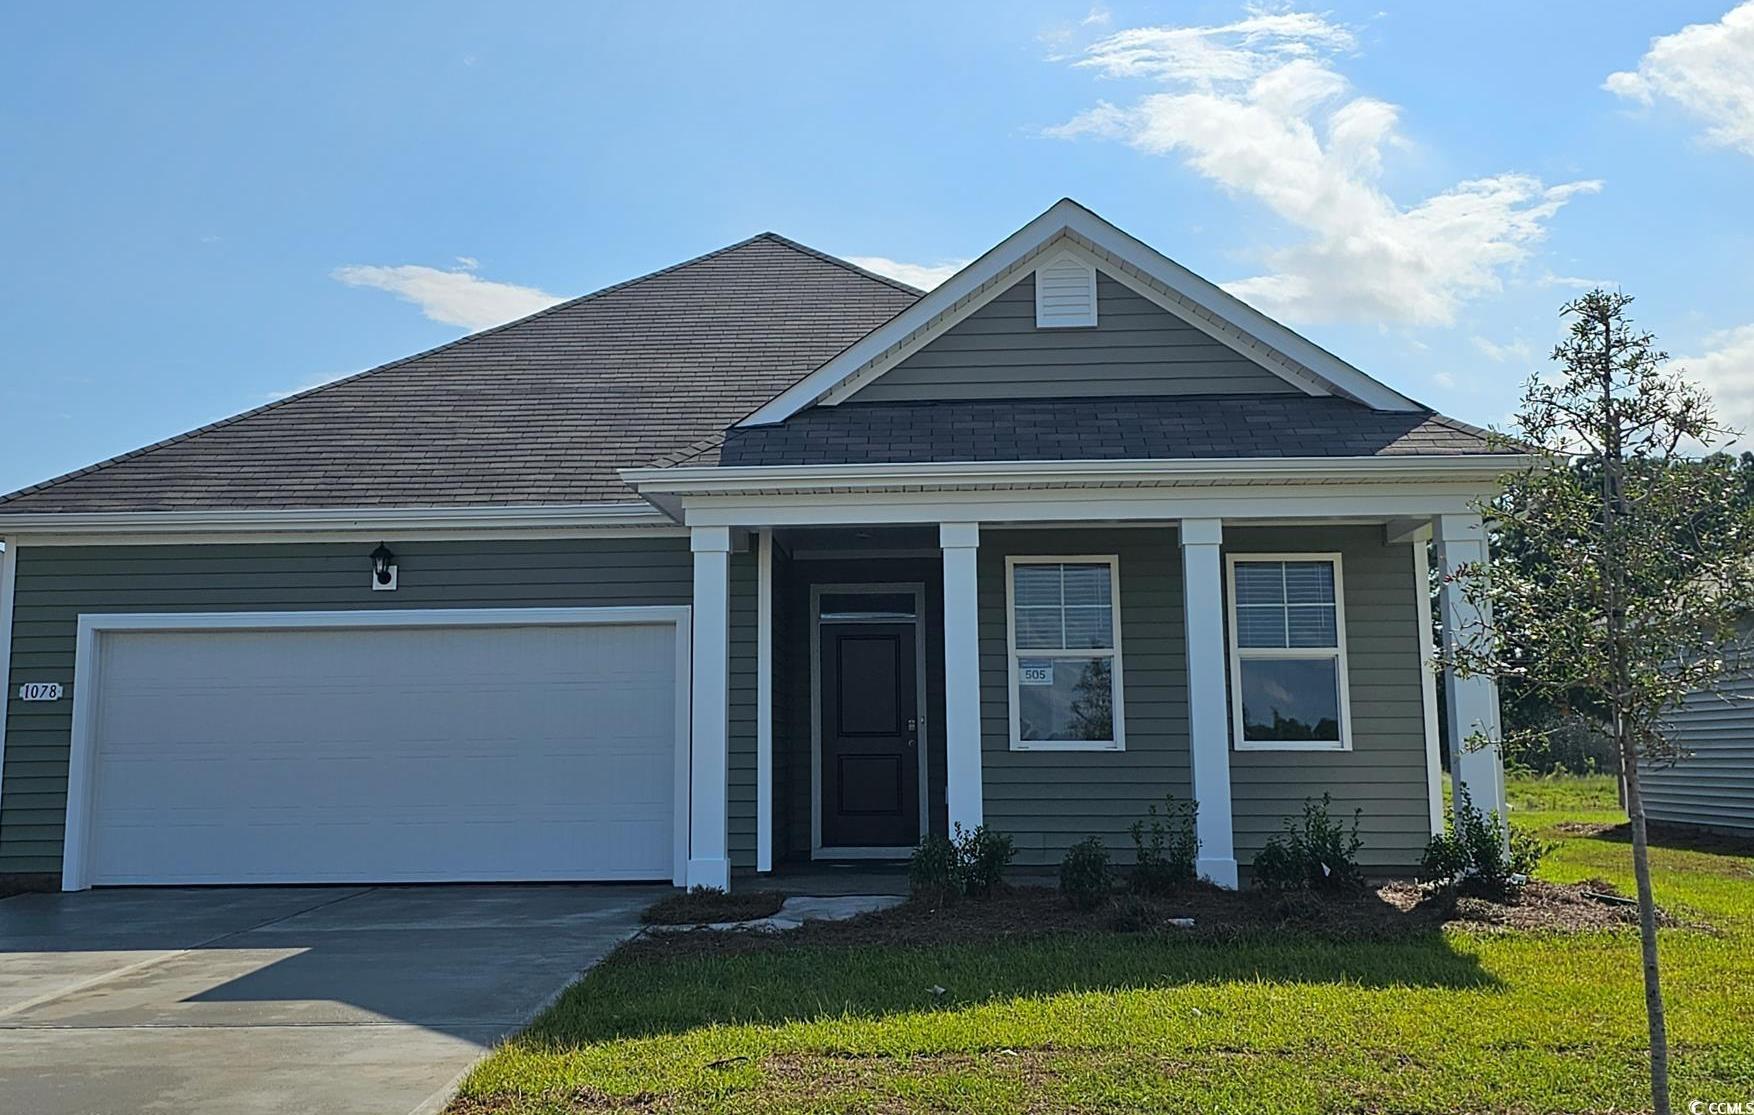 Photo one of 137 Sandown Dr. Conway SC 29526 | MLS 2402440